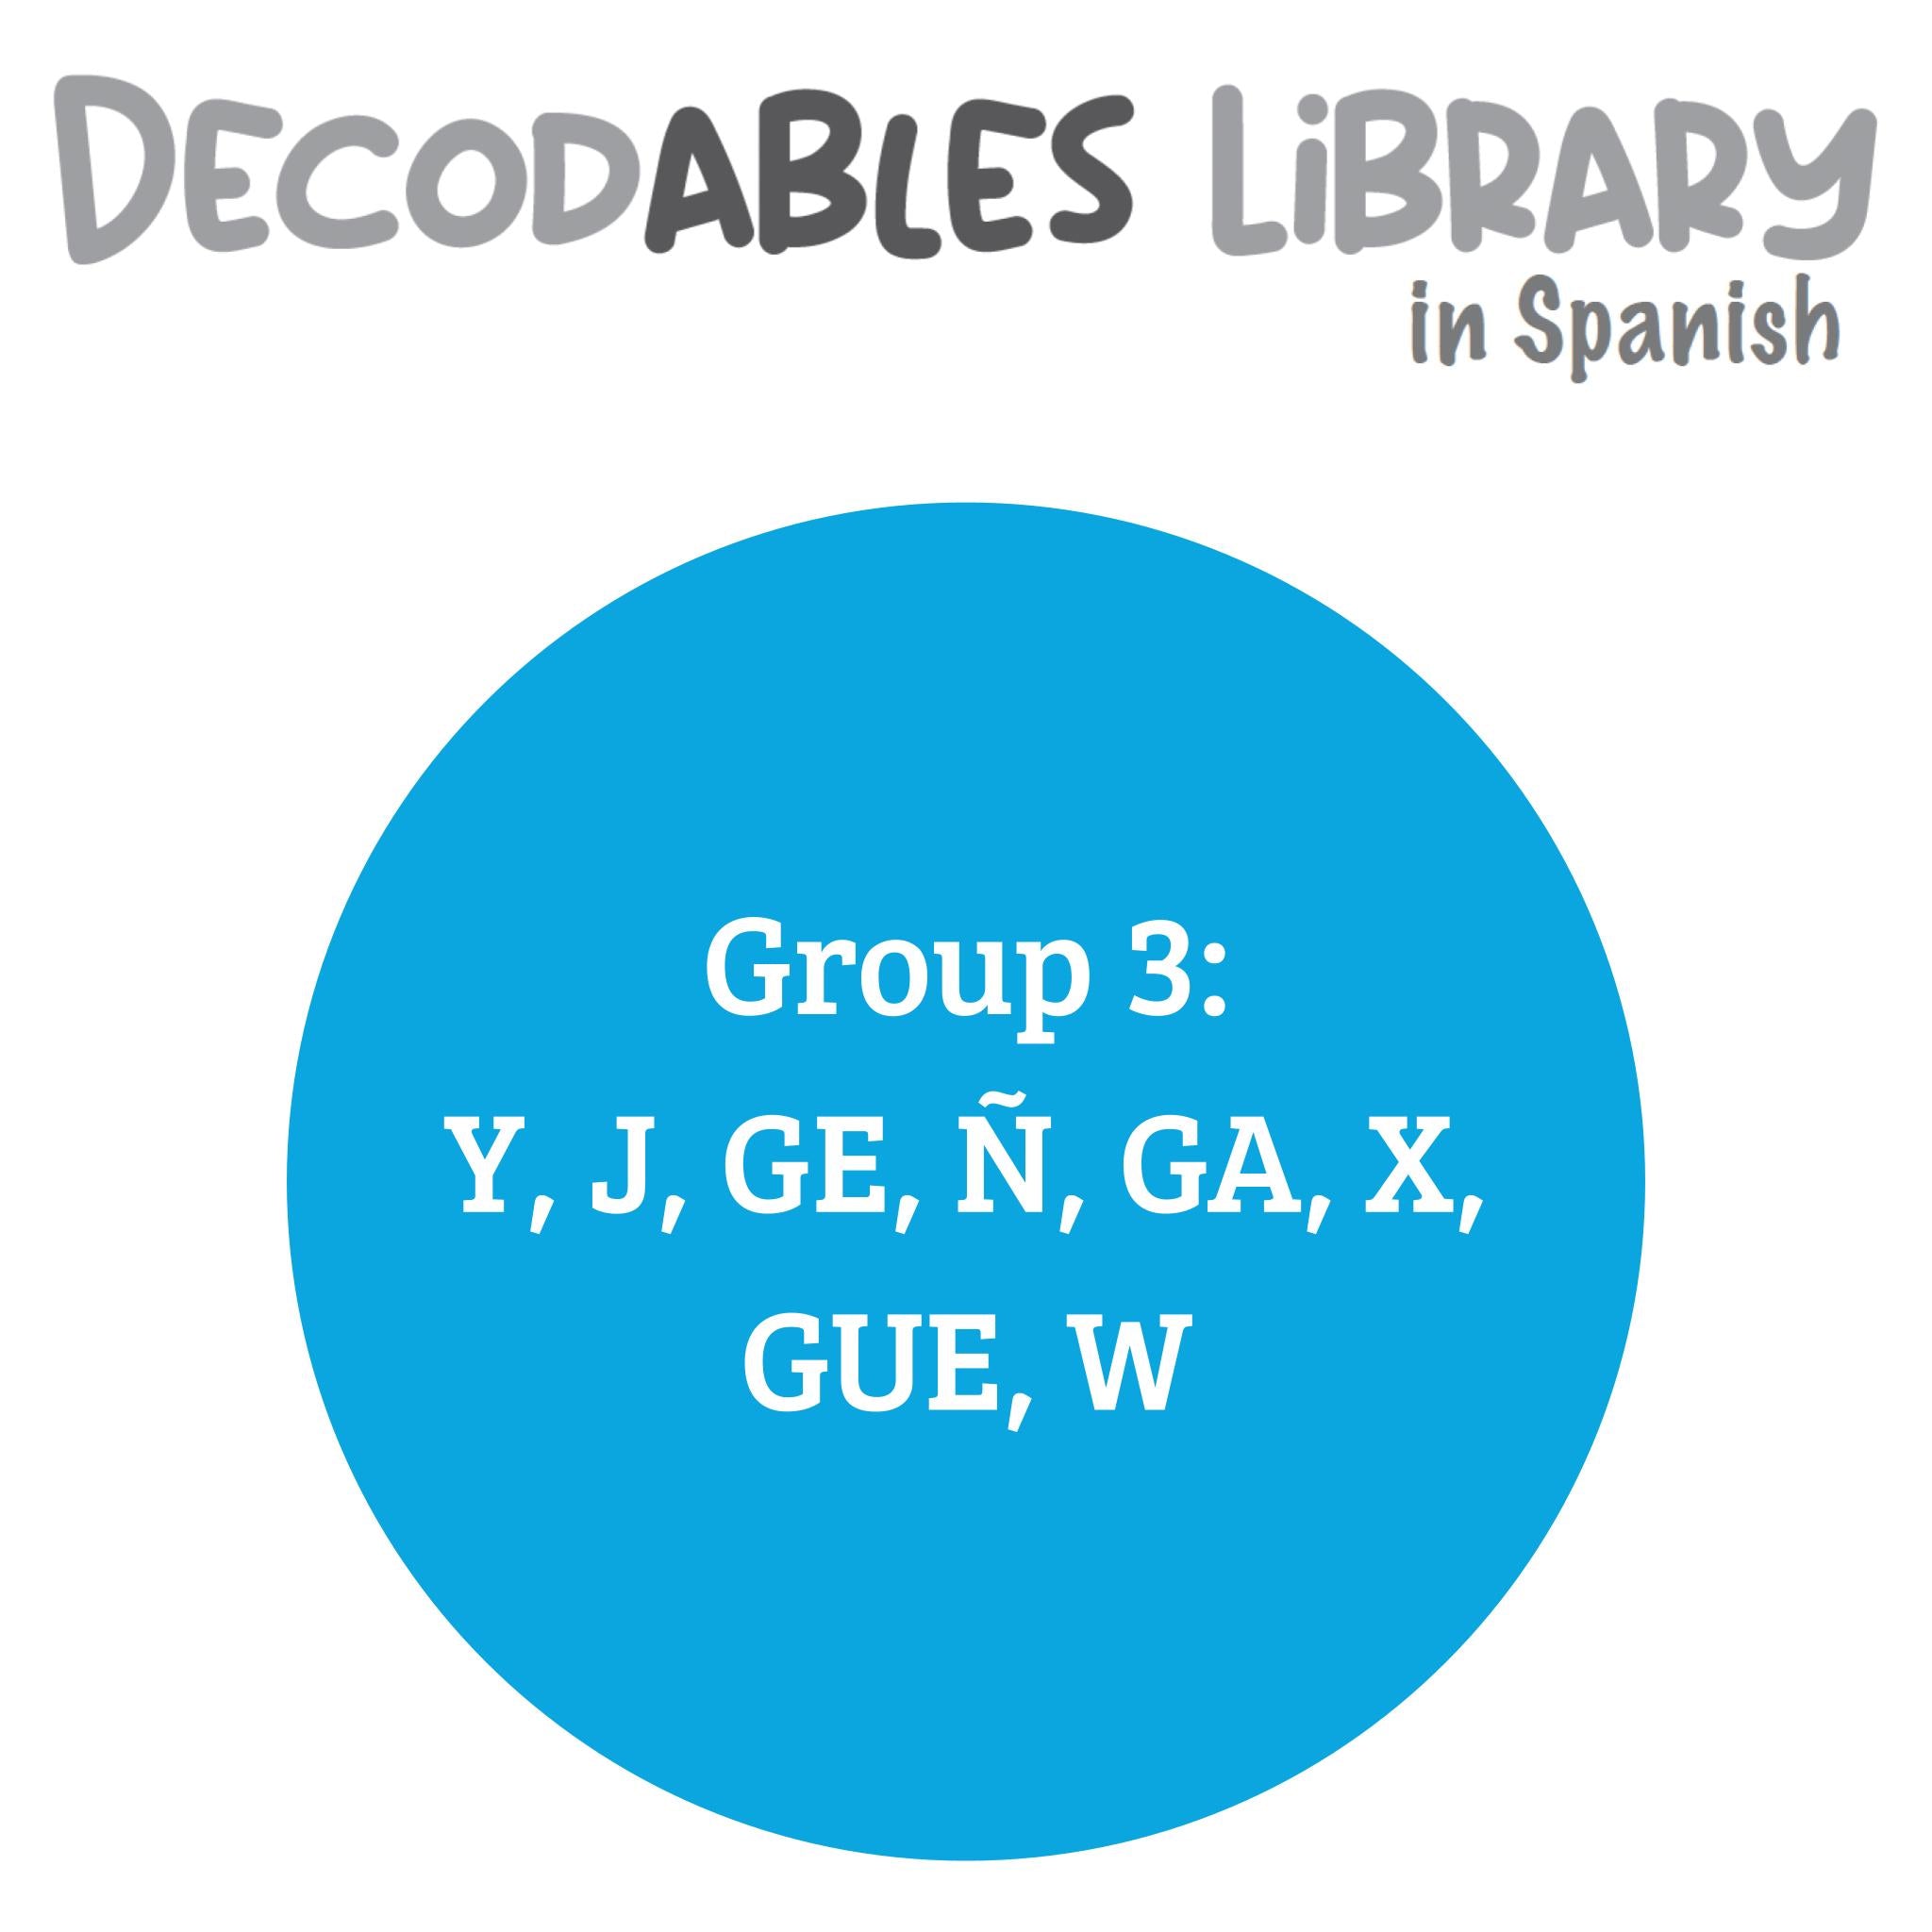 Spanish Decodables Library - Group 3: Y, J, GE, Ñ, GA, X, GUE, W (set of 11 titles)